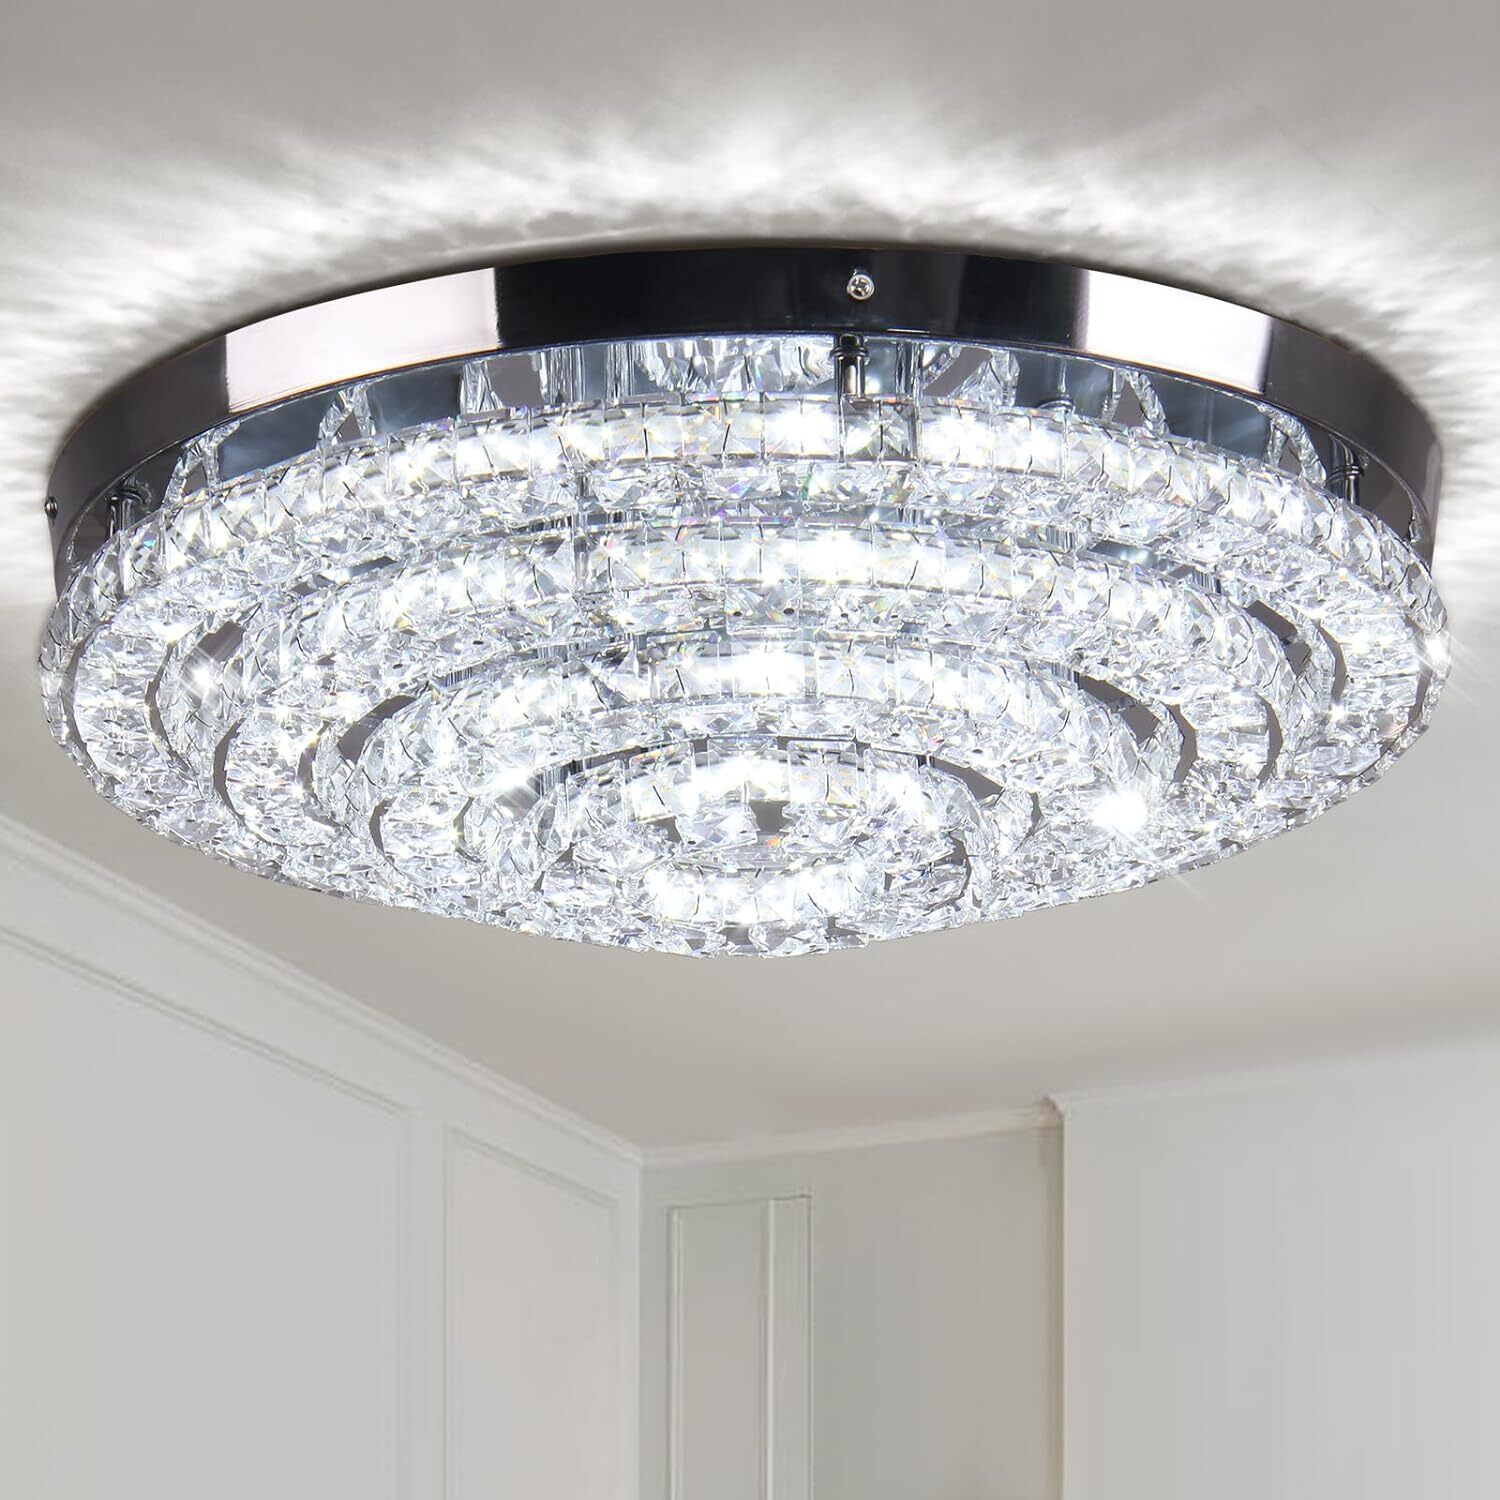 17.7 Contemporary Ceiling Light with Crystals - Large LED Fixture for